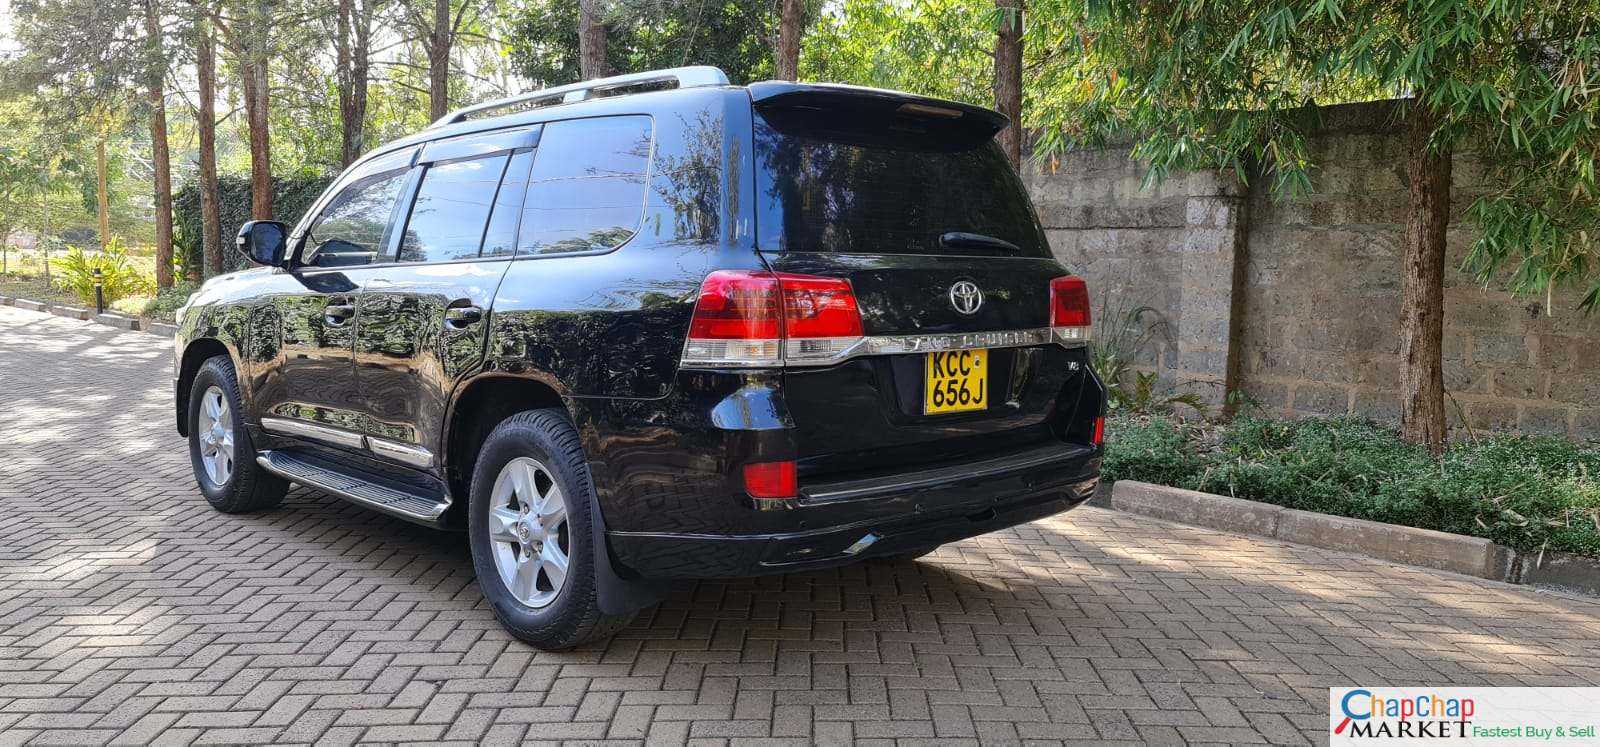 Toyota Landcruiser VX V8 200 SERIES QUICK SALE You Pay 40% Deposit Trade in Ok